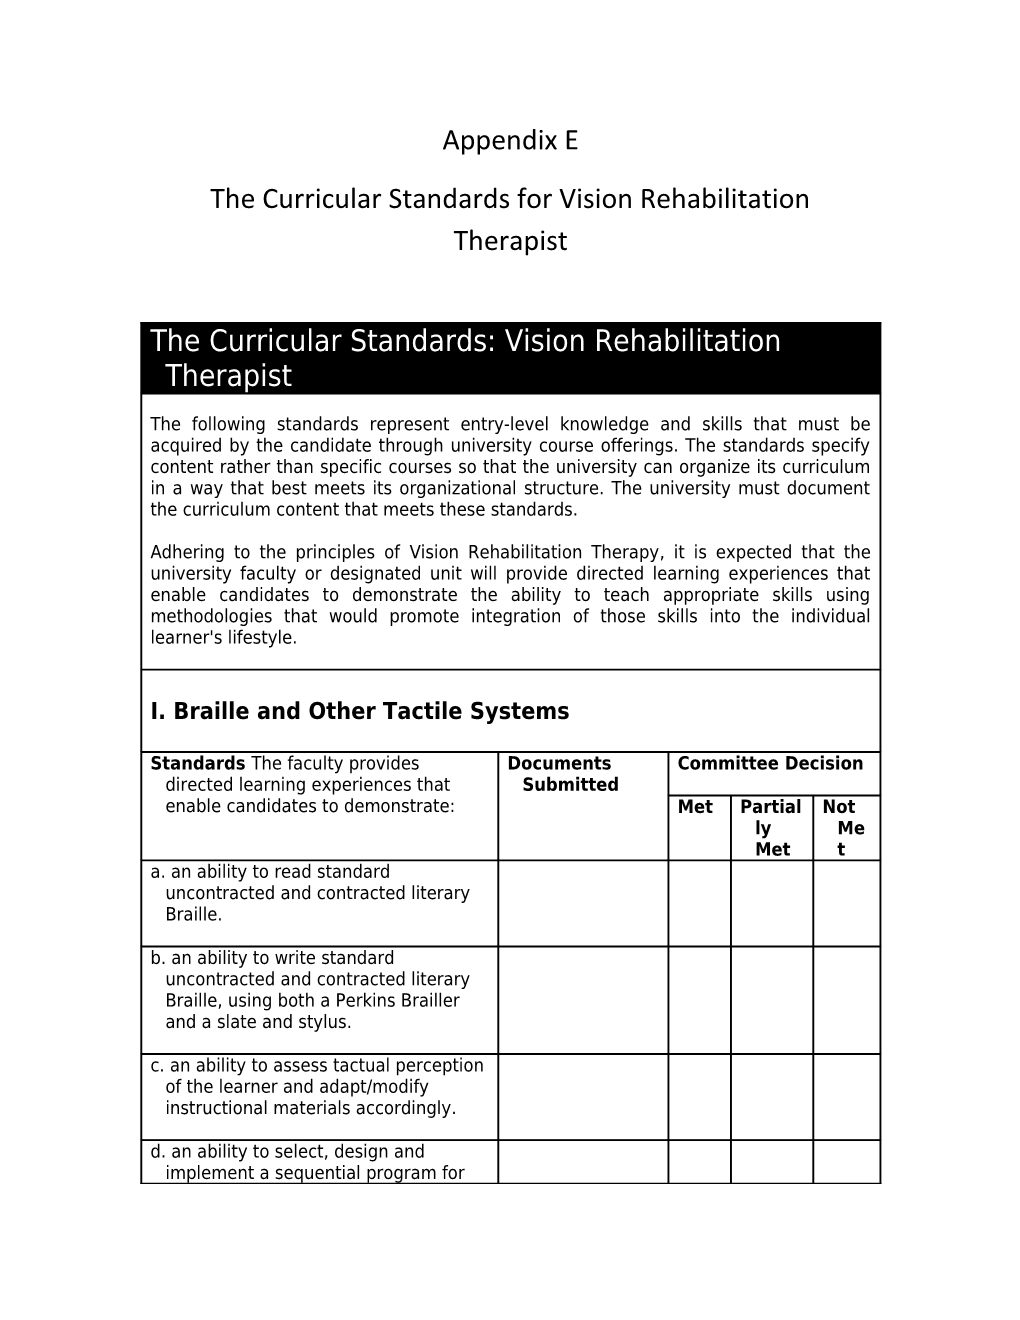 The Curricular Standards for Vision Rehabilitation Therapist